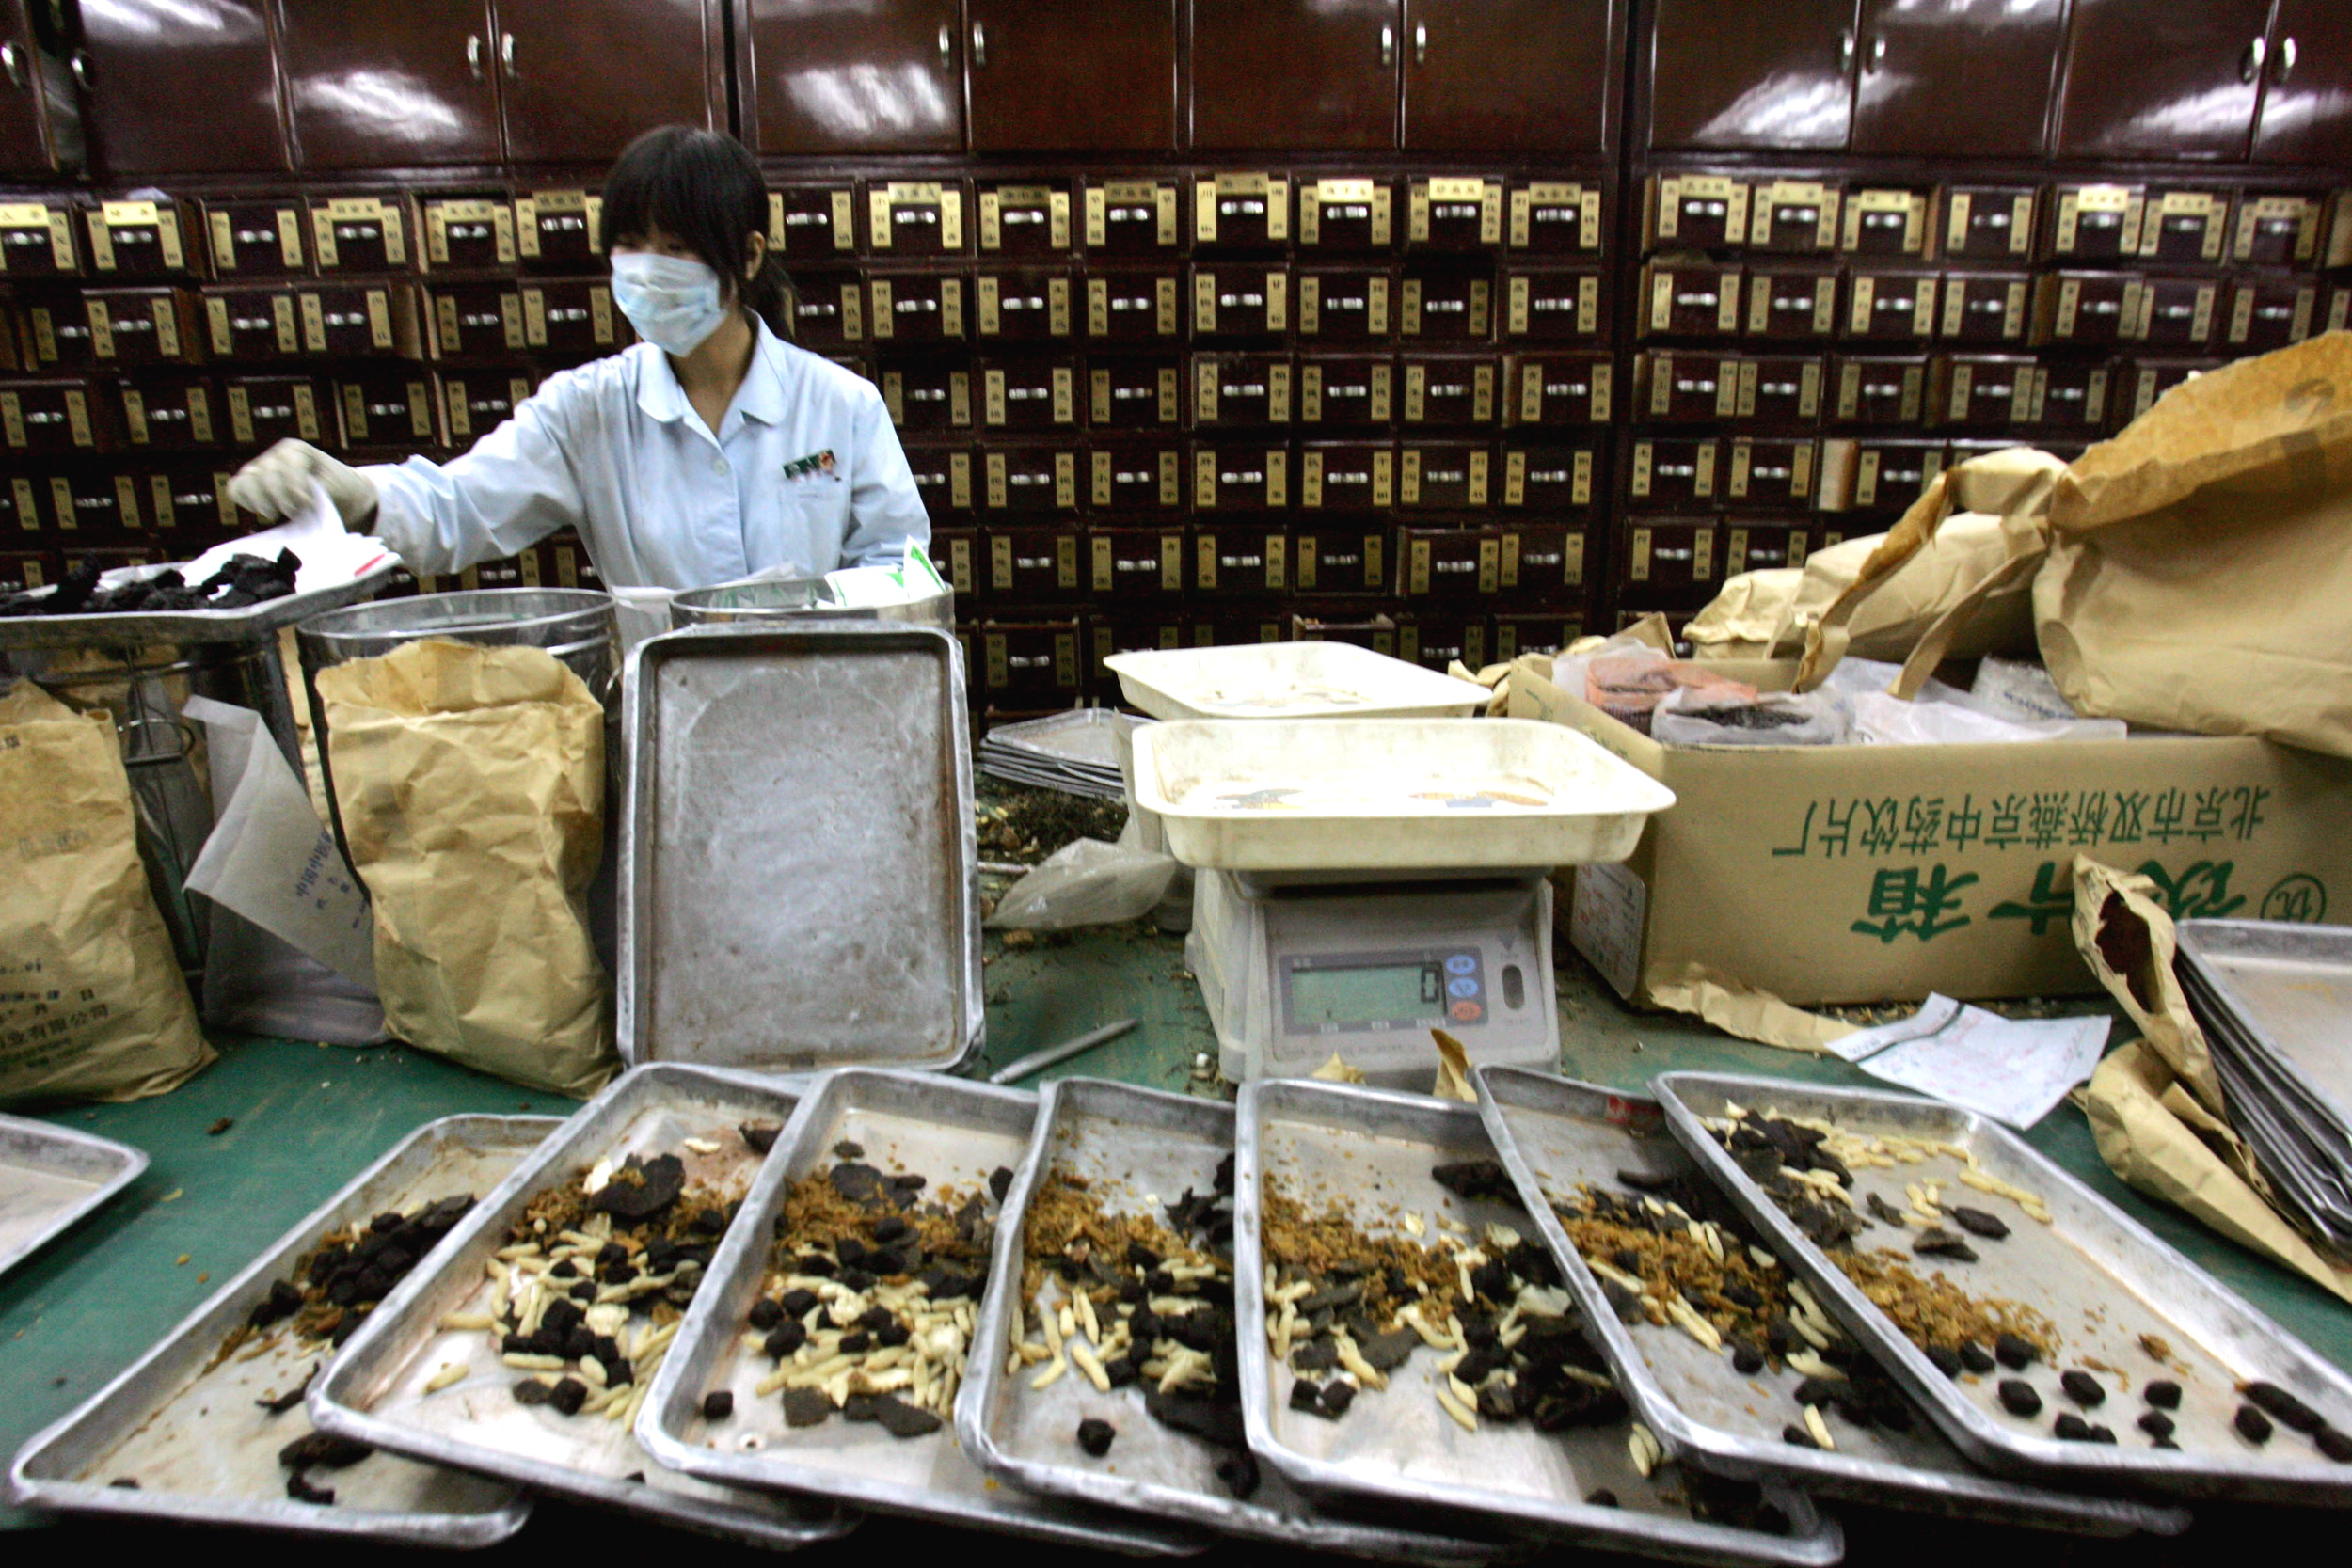 A Chinese girl sorts out traditional Chinese remedies to supply Doctor's orders for patients at a clinic in Beijing, China Thursday Dec. 15, 2005. As temperatures drop and flu related symptoms become more common, Chinese flock to traditional non aggressive methods to soothe their ailments. While Western medicine is commonly available through out China for the treatment of many diseases, Chinese still turn traditional Chinese medicine which plays a special role for the nation in treating the sick and keeping healthy. (AP Photo/Elizabeth Dalziel)